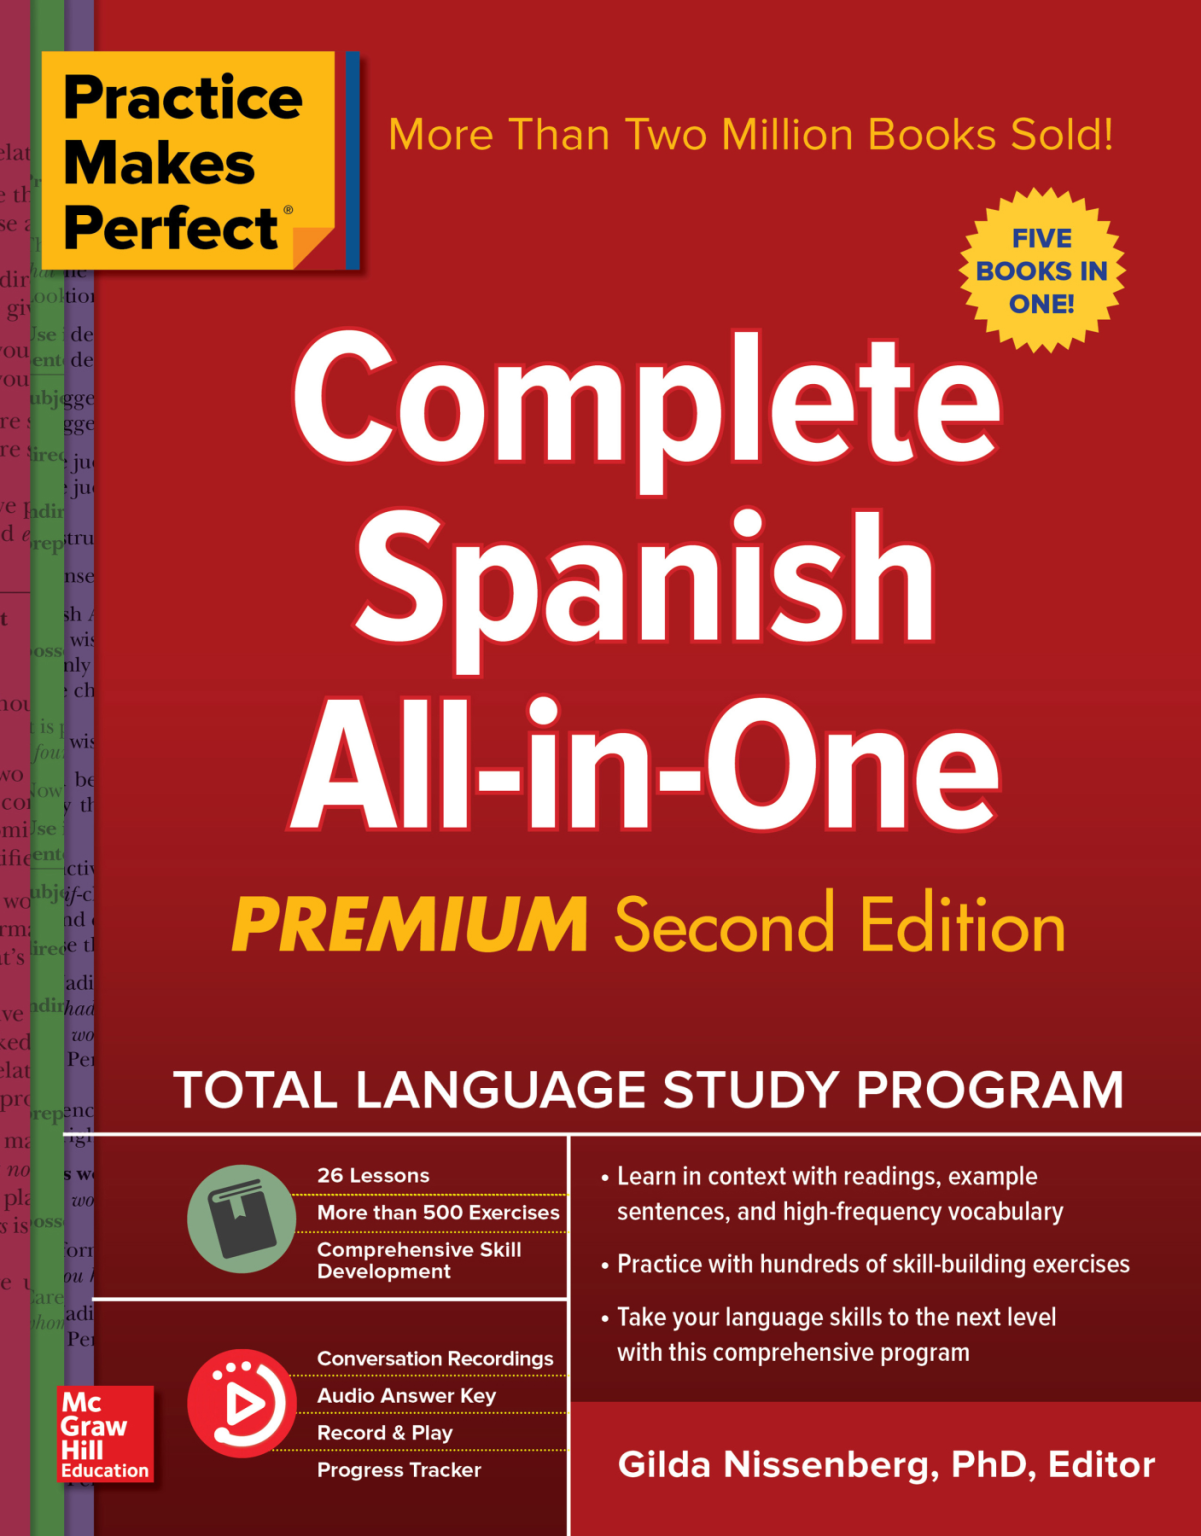 Rich results on Google's SERP when searching for ''Practice-Makes-Perfect-Complete-Spanish-All-In-One-Book''